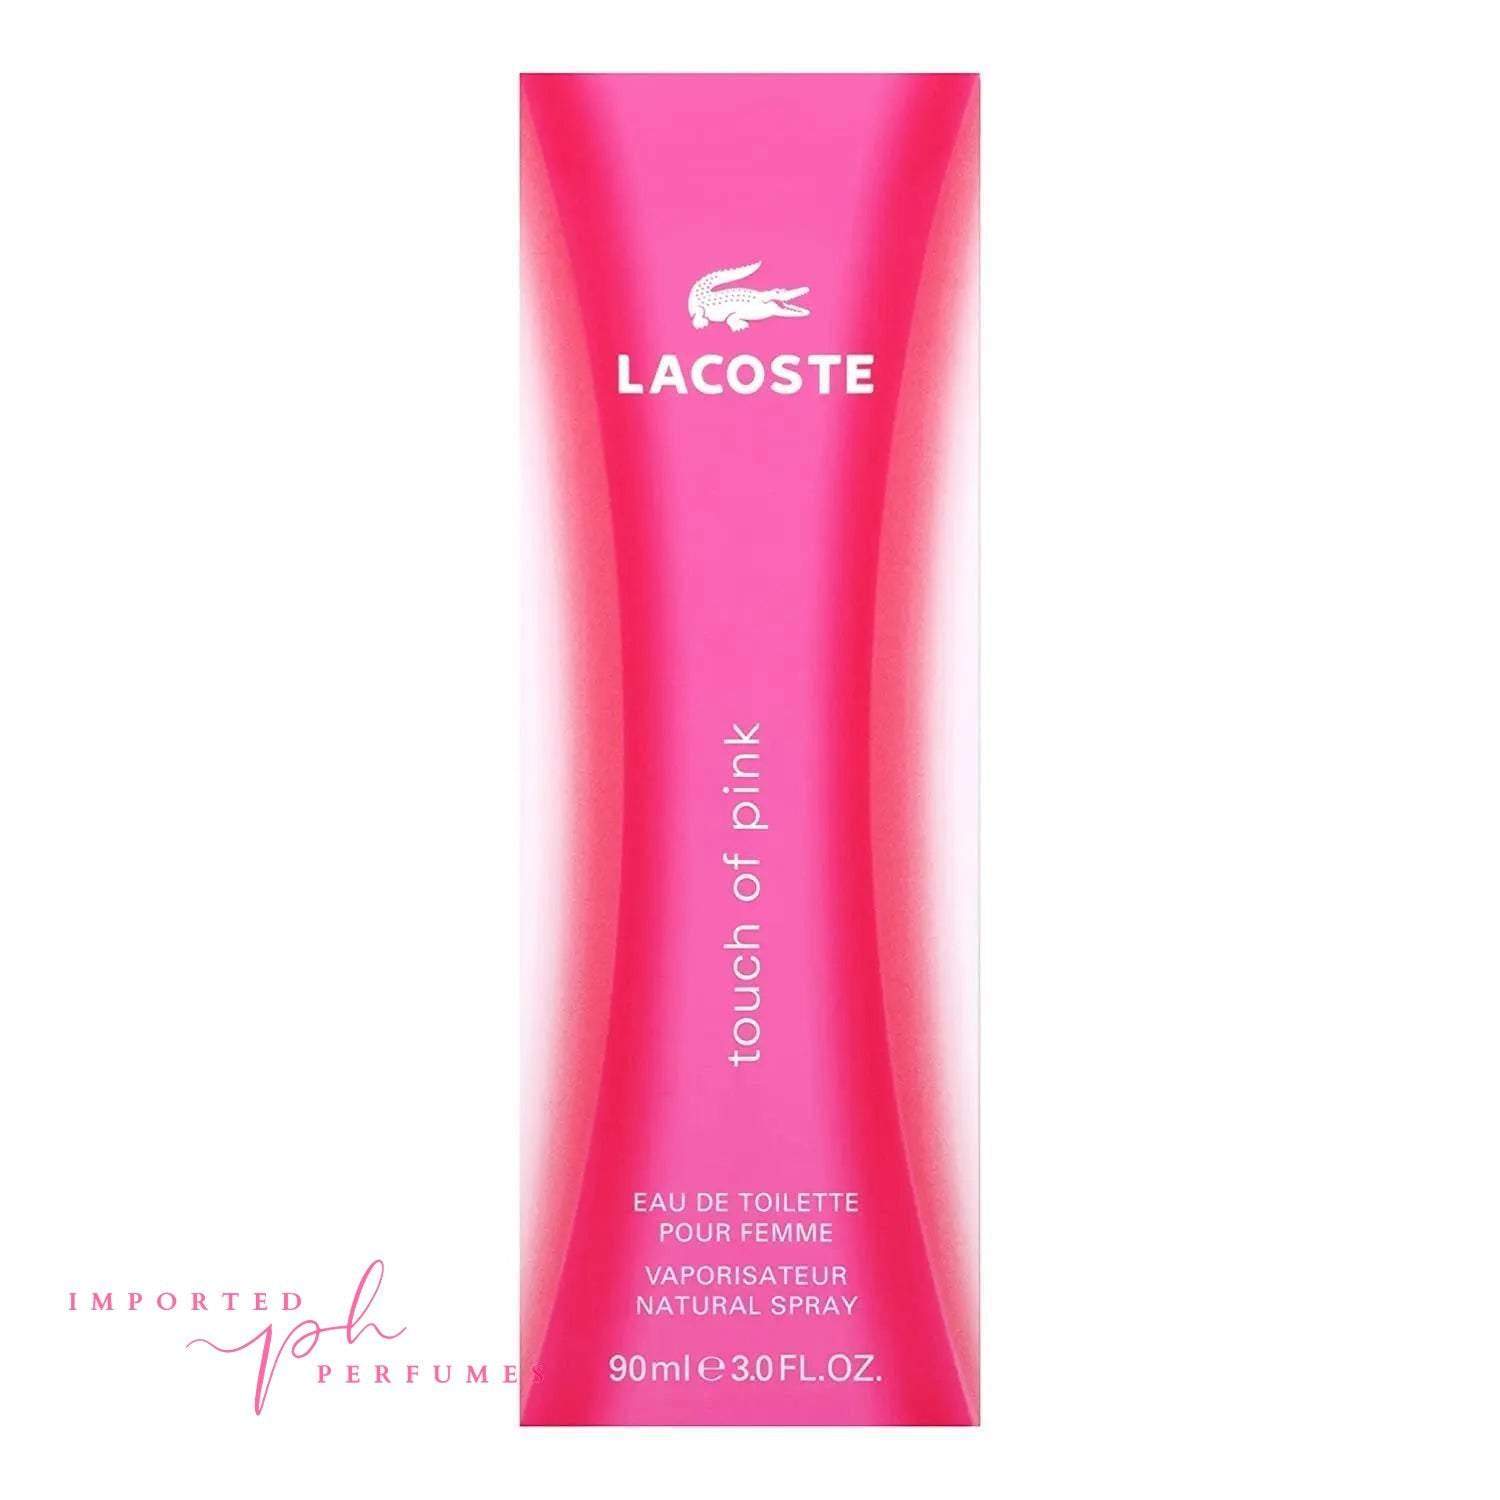 Lacoste Touch of Pink Eau de Toilette For Women 90ml-Imported Perfumes Co-Lacoste,pink,touch of pink,women